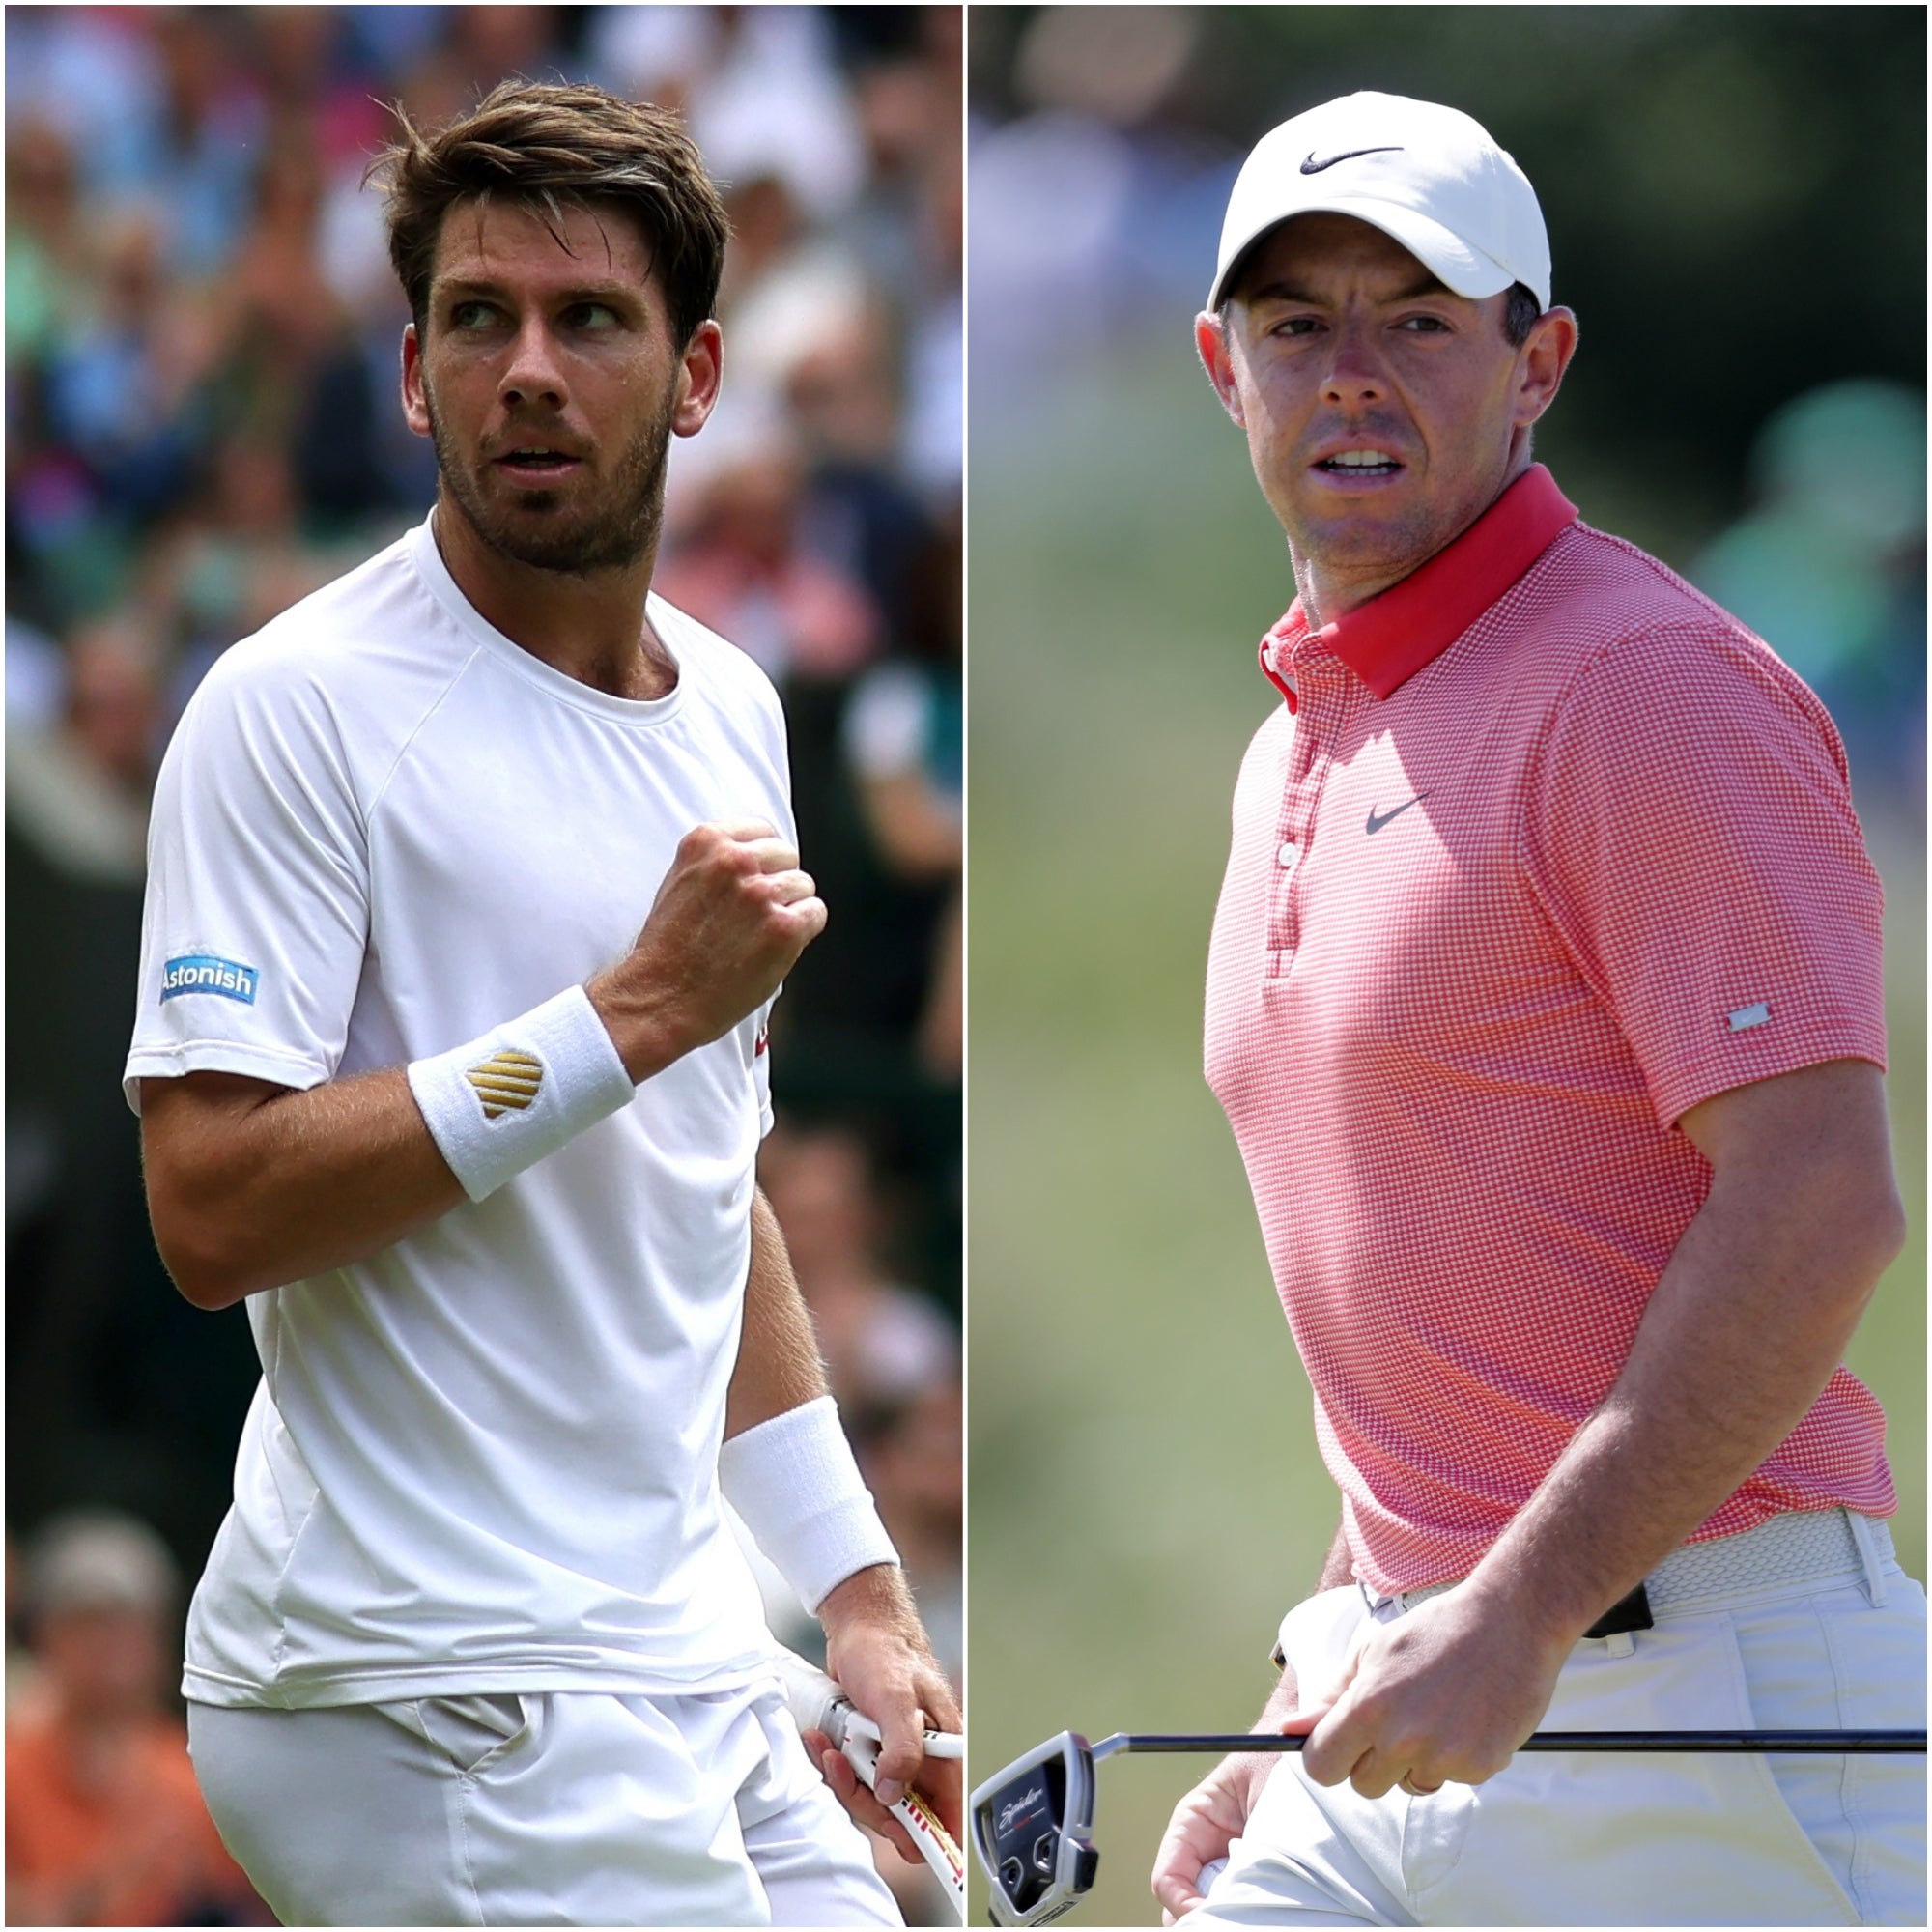 Tennis star Cameron Norrie and golfer Rory McIlroy scored big wins for the UK in the United States on Sunday (Steve Paston/Richard Sellers/PA)